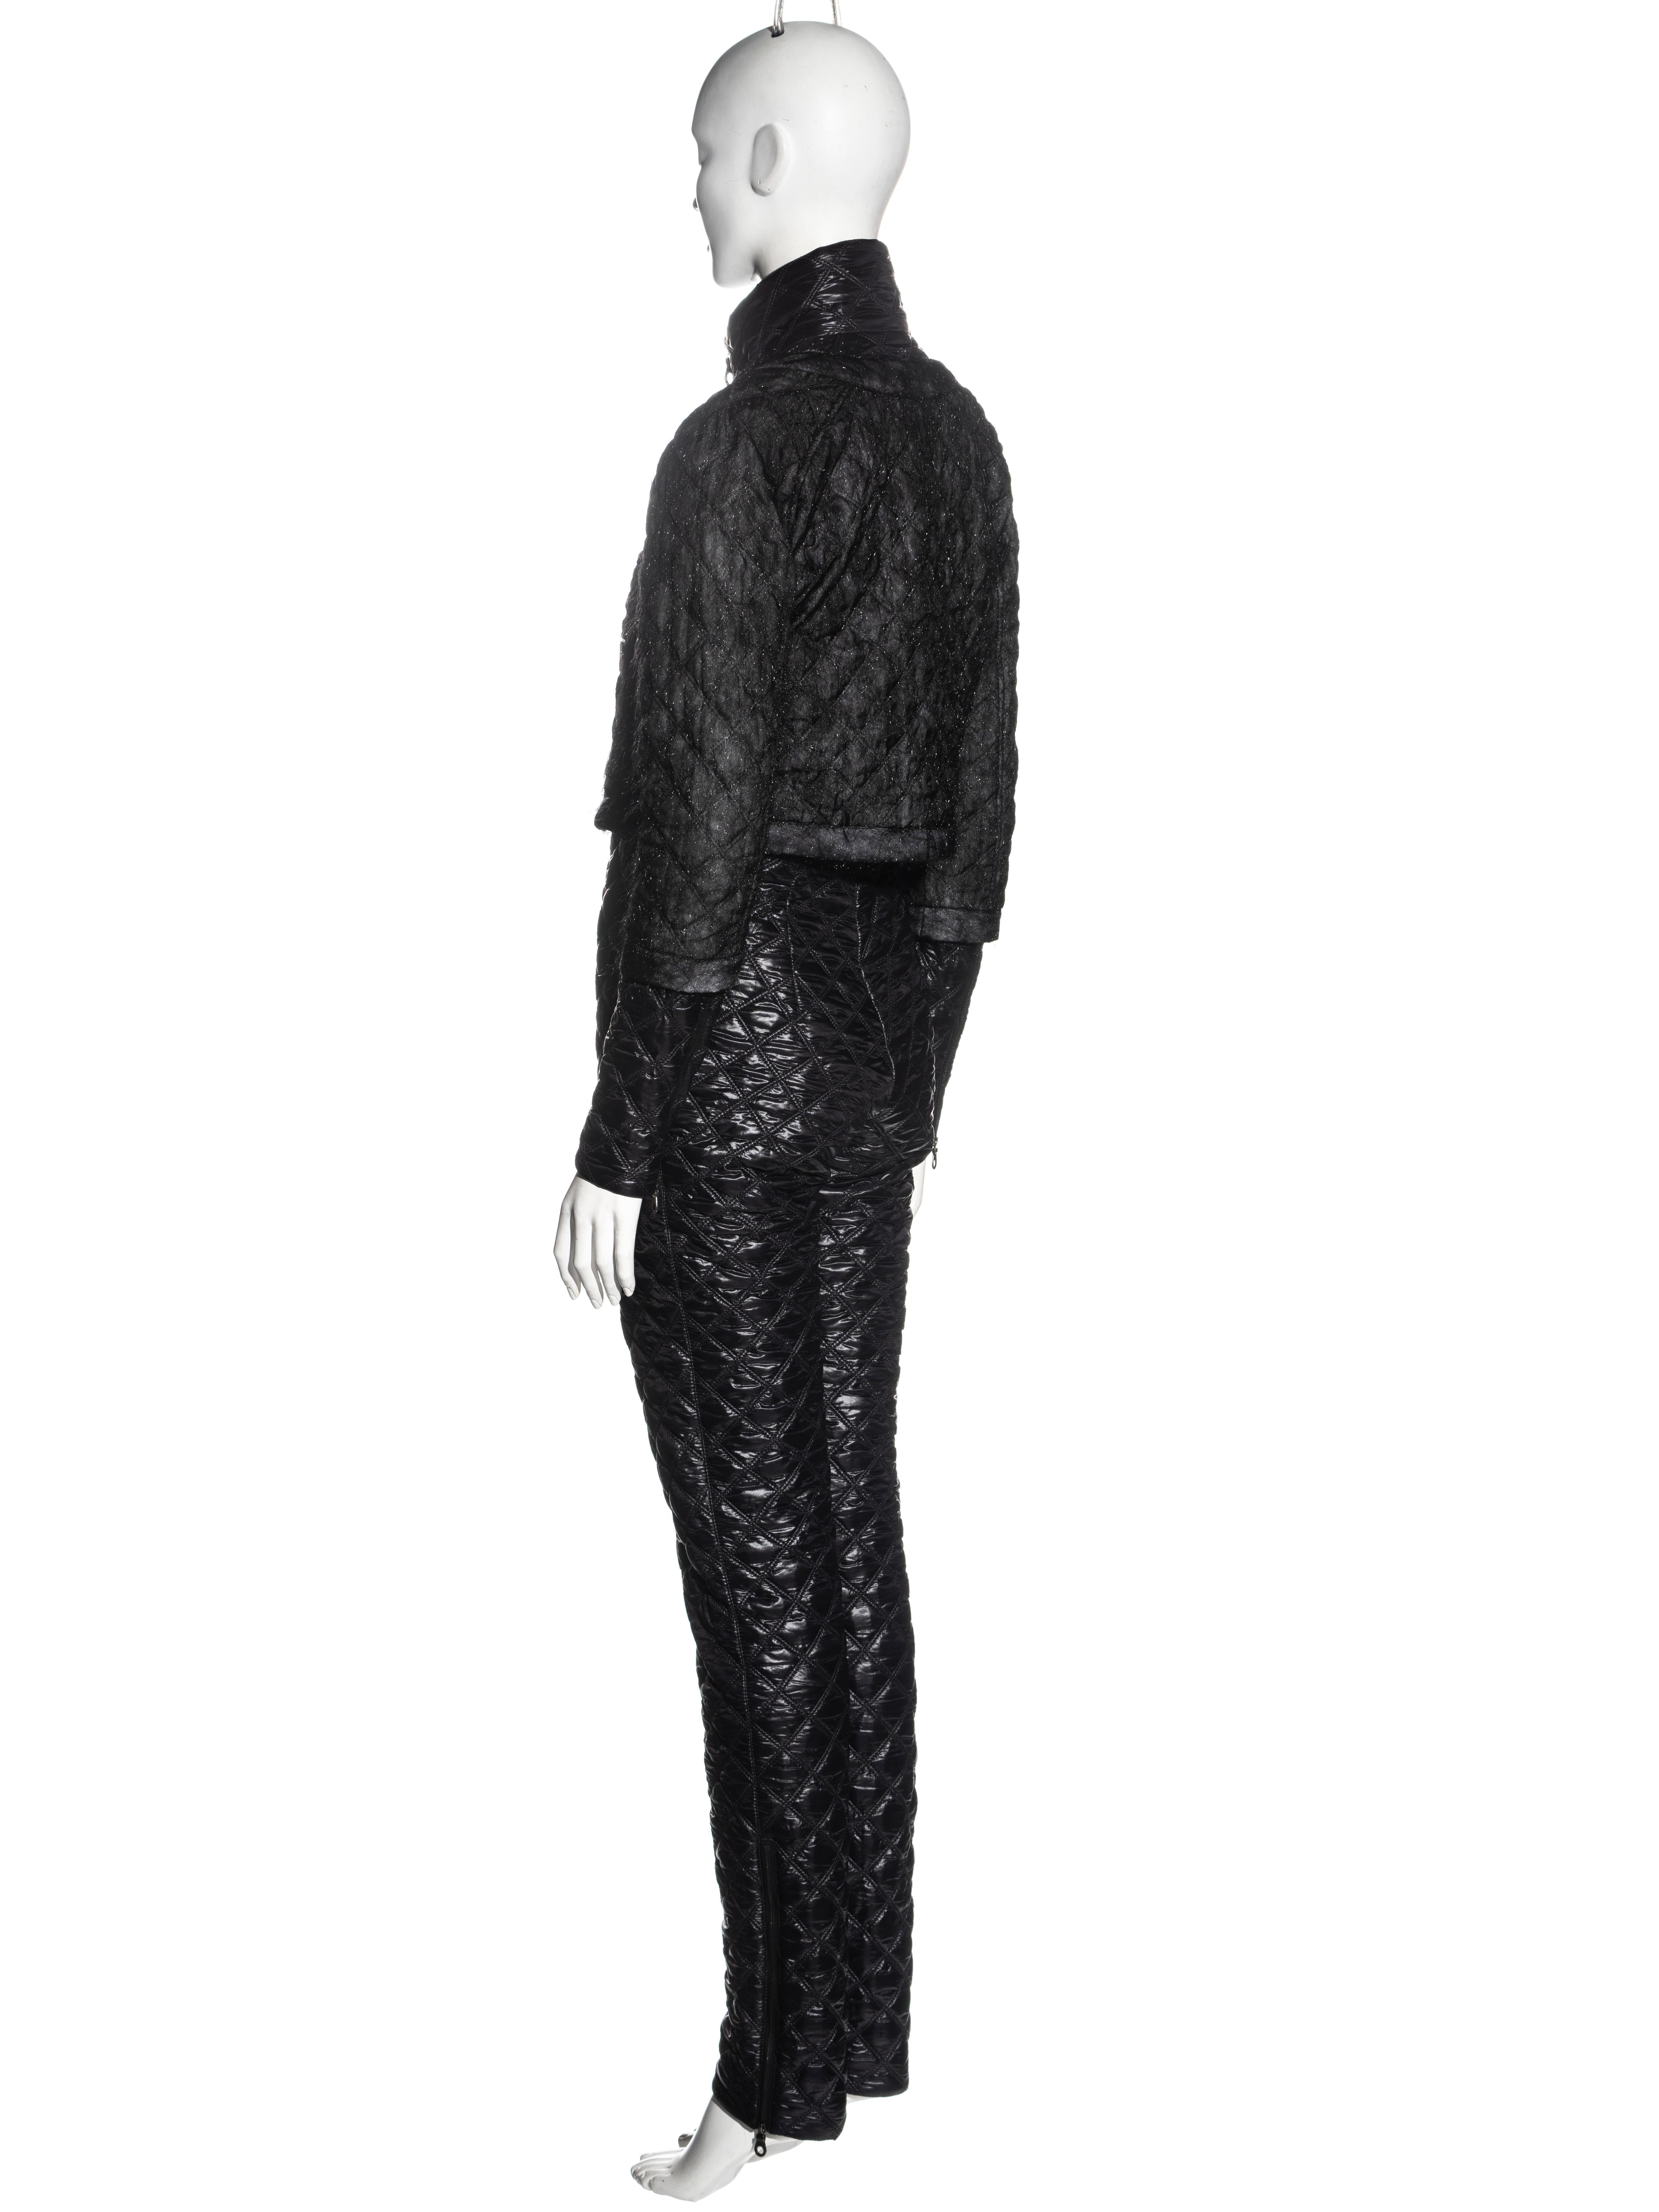 Chanel by Karl Lagerfeld black quilted nylon jumpsuit, fw 2011 For Sale 2